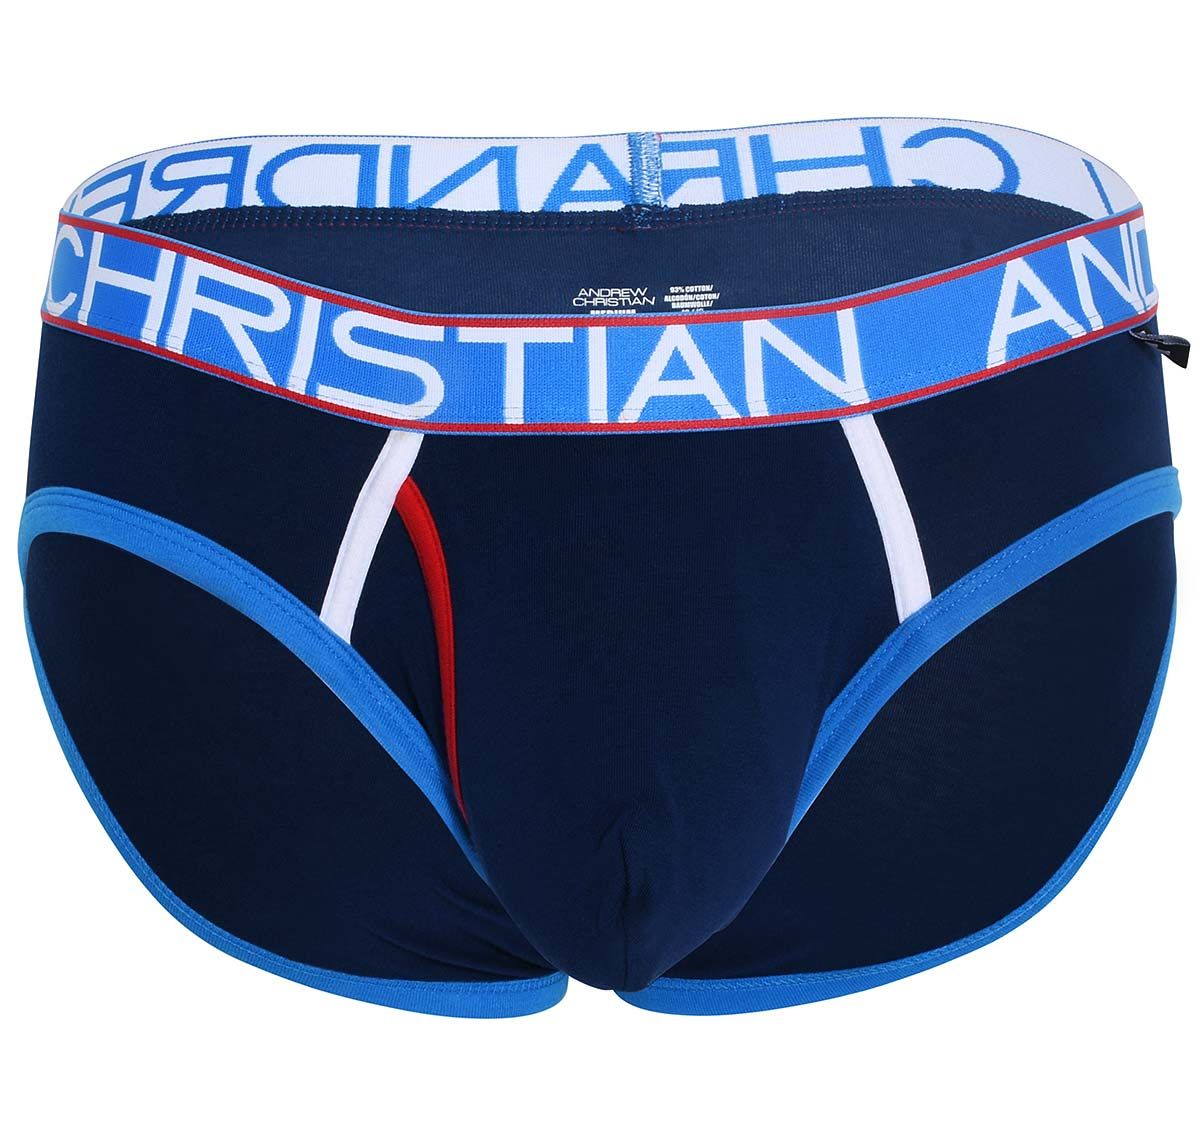 Andrew Christian Slip FLY TAGLESS BRIEF w/ ALMOST NAKED 92187, bleu marine